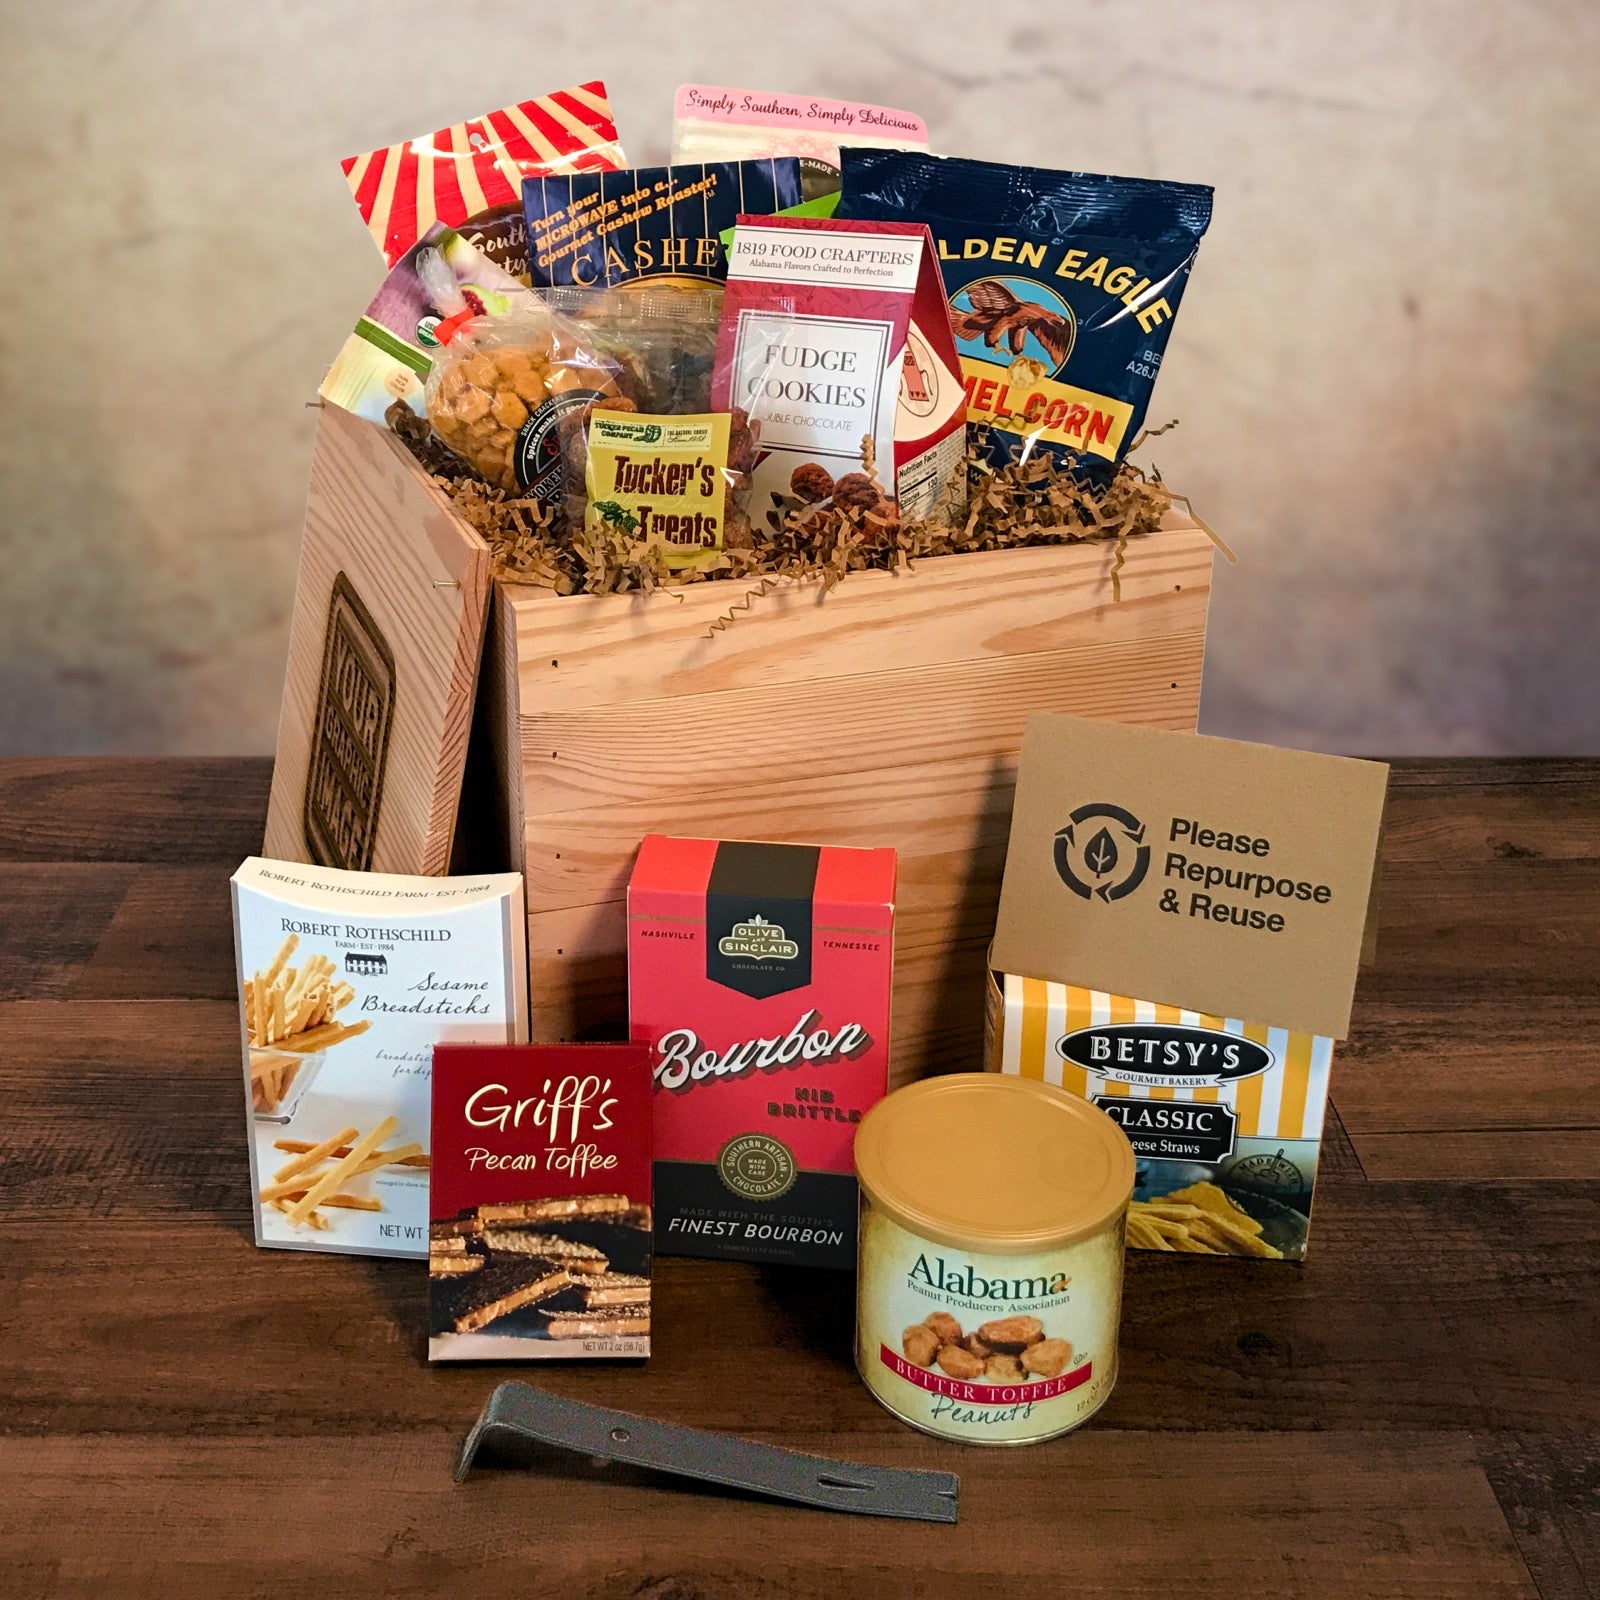 DIY Gift Crate Kit by Carpenter Core with gifts, GK-6.25-6.375-7-GT-NW-LL, 6-GK-6.25-6.375-7-GT-NW-LL, 12-GK-6.25-6.375-7-GT-NW-LL, 24-GK-6.25-6.375-7-GT-NW-LL, 48-GK-6.25-6.375-7-GT-NW-LL, 96-GK-6.25-6.375-7-GT-NW-LL